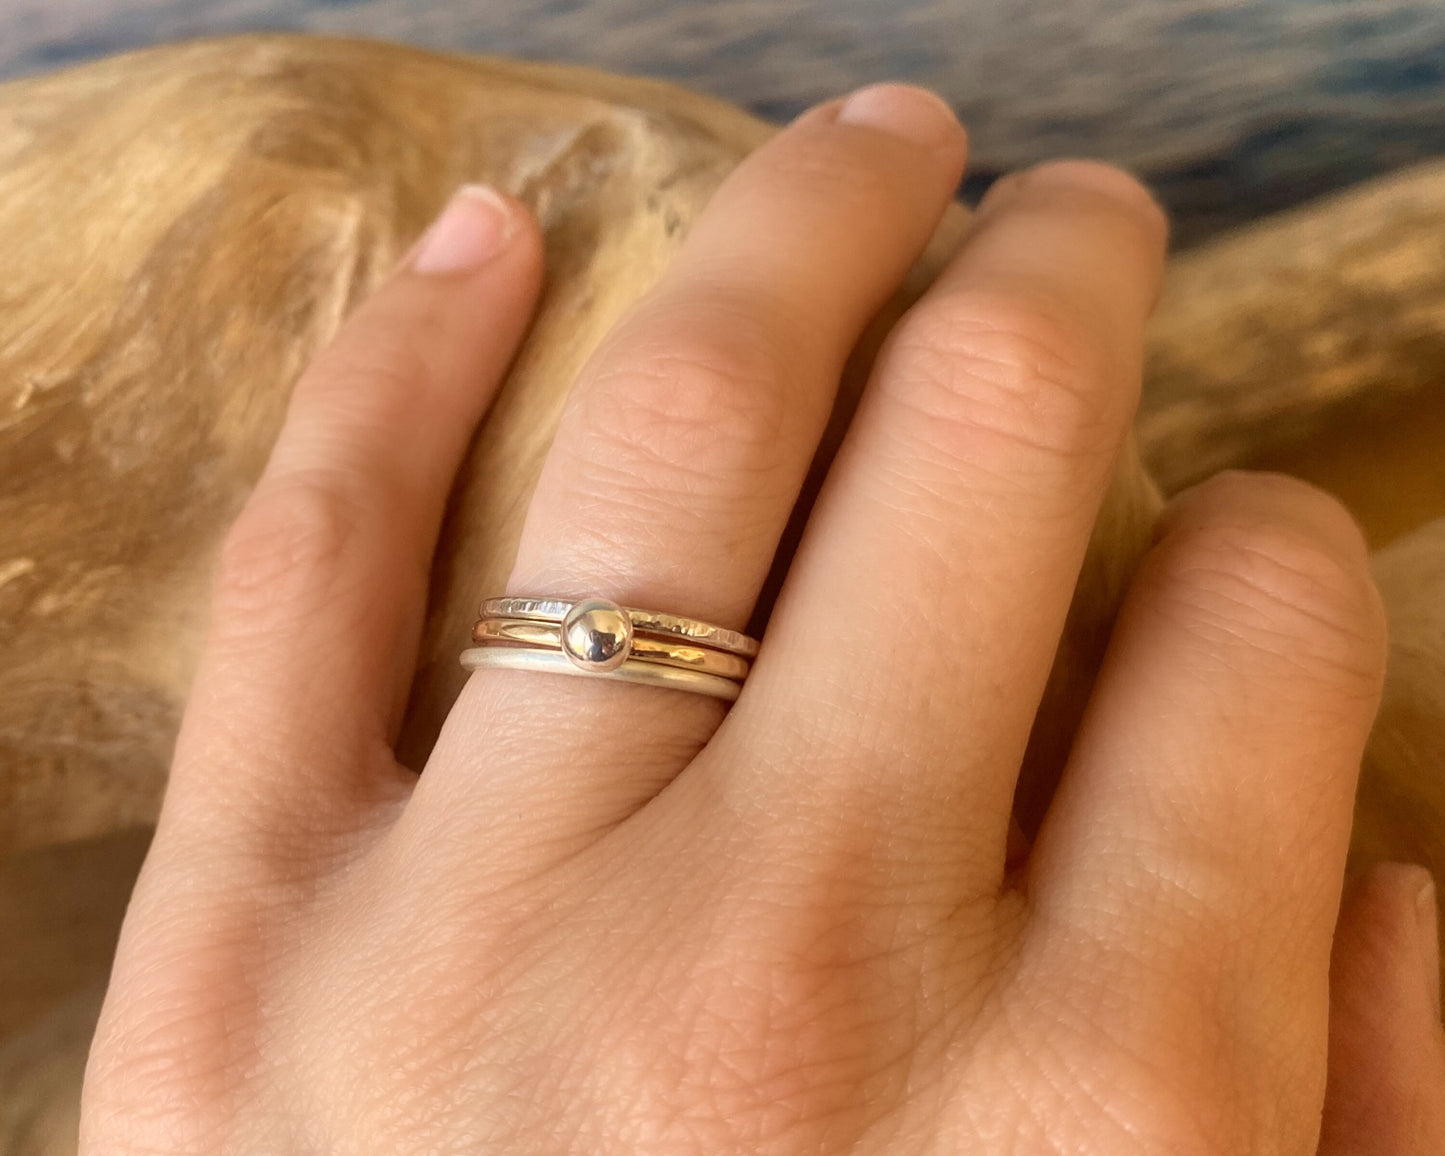 9ct Gold Nugget Stacking Ring Set, 925 Sterling Silver Nugget Stacking Rings, 9ct Gold and Sterling Silver 1.2mm Skinny Minimalist Ring Band